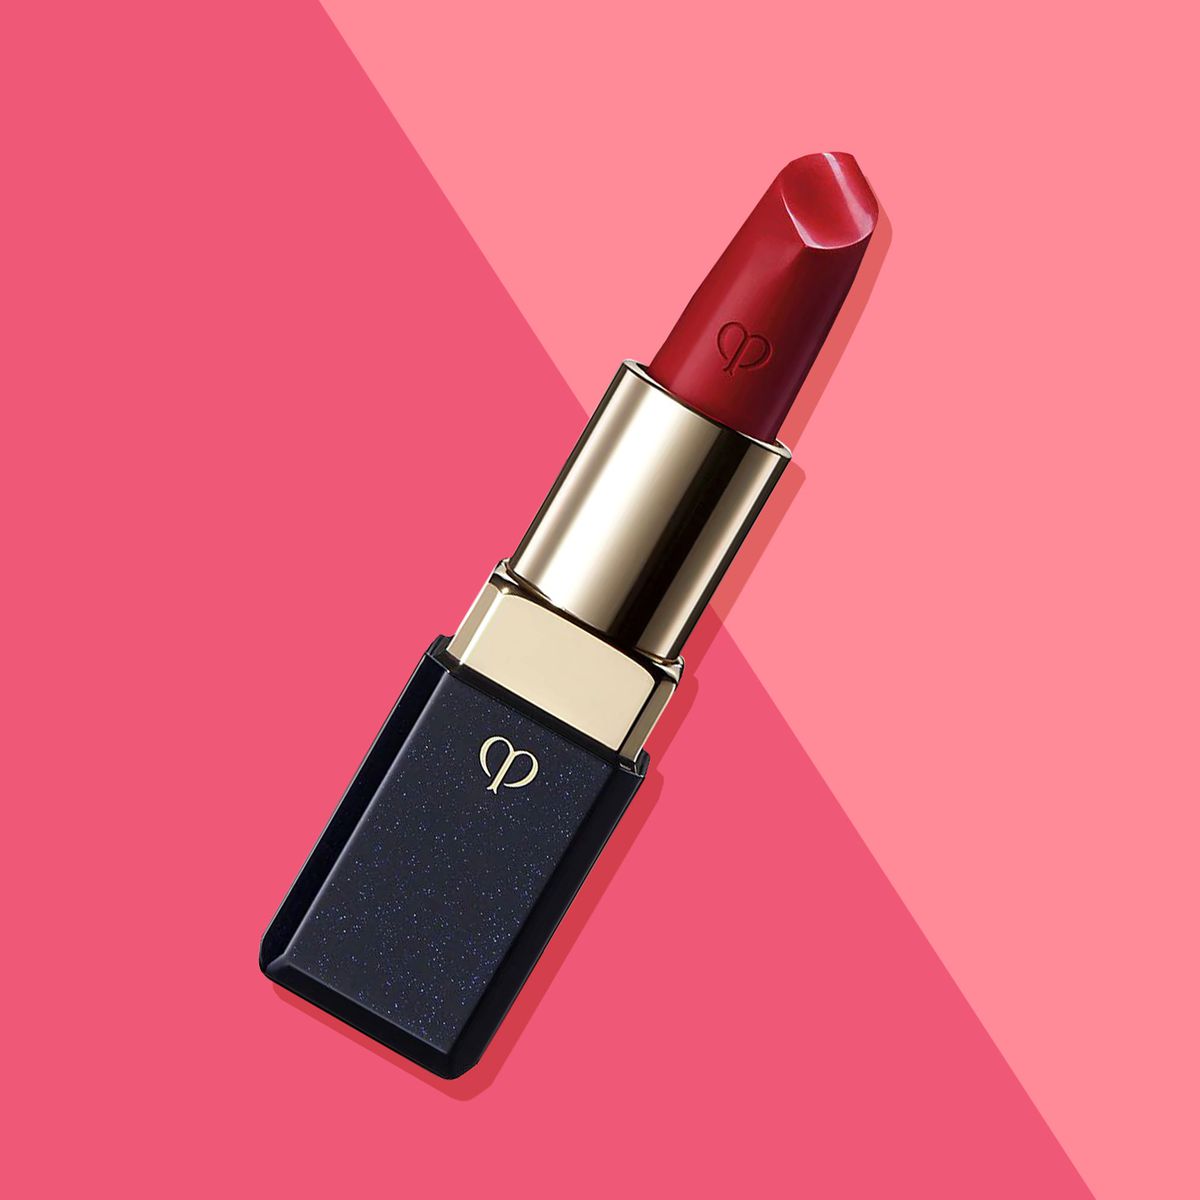 Cle De Peau Beaute Red Lipstick Reviews - Best Red Lipstick to Buy.